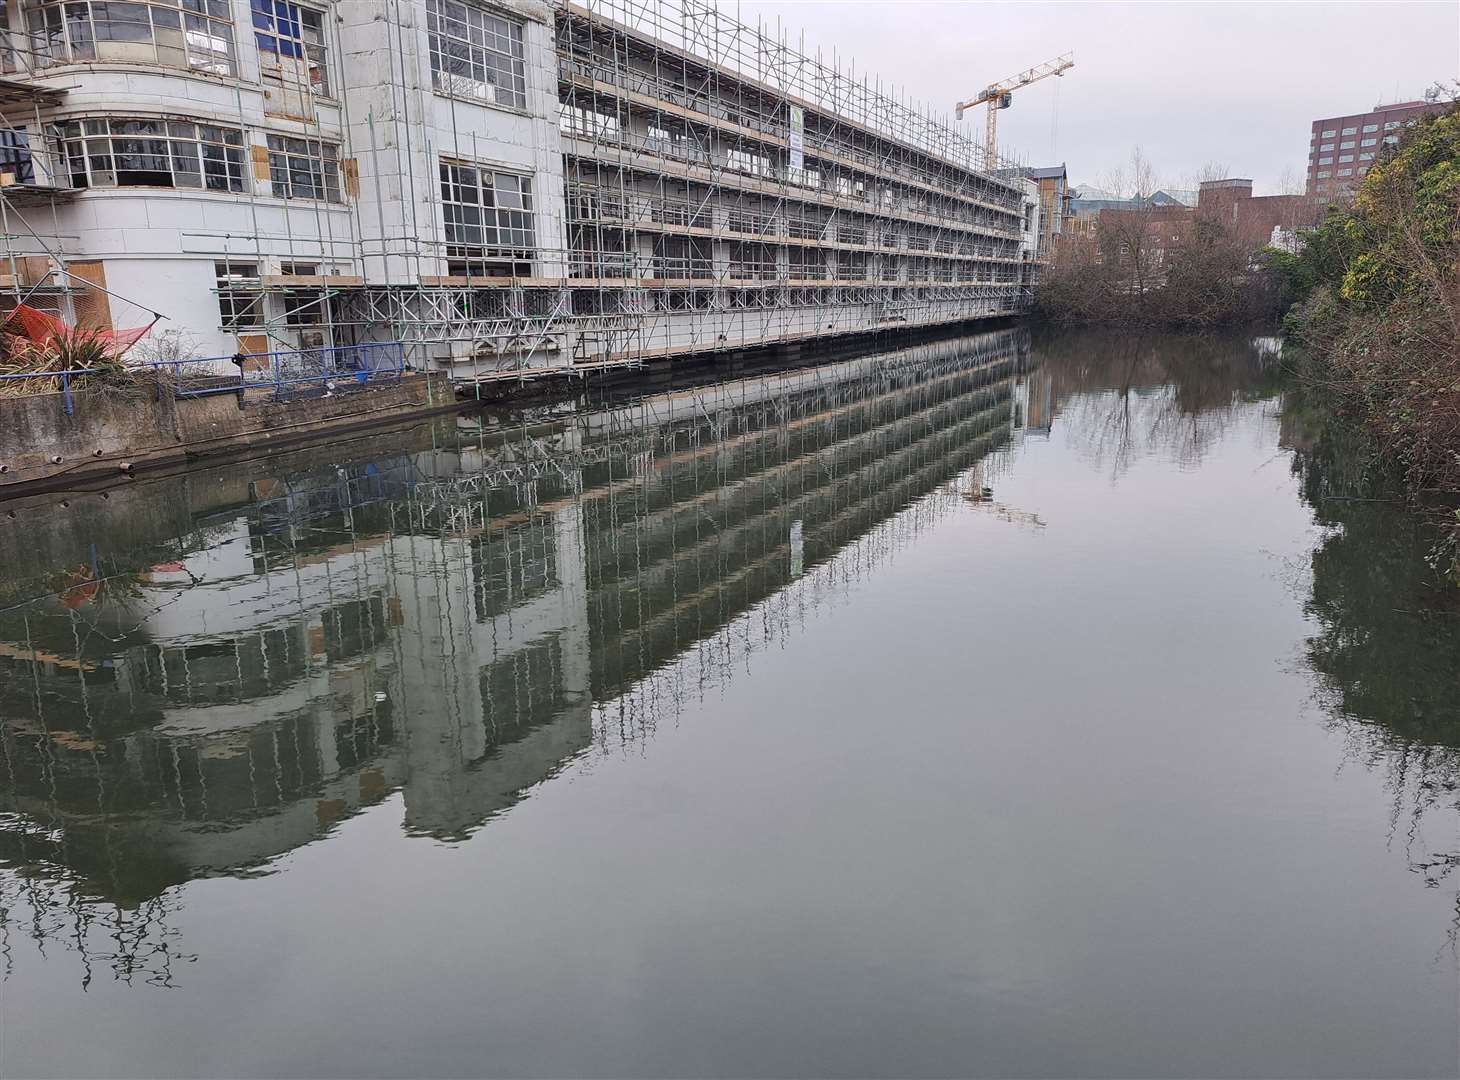 The millpond on the River Len beside the former Rootes building has been described as a "sewage settlement lagoon"